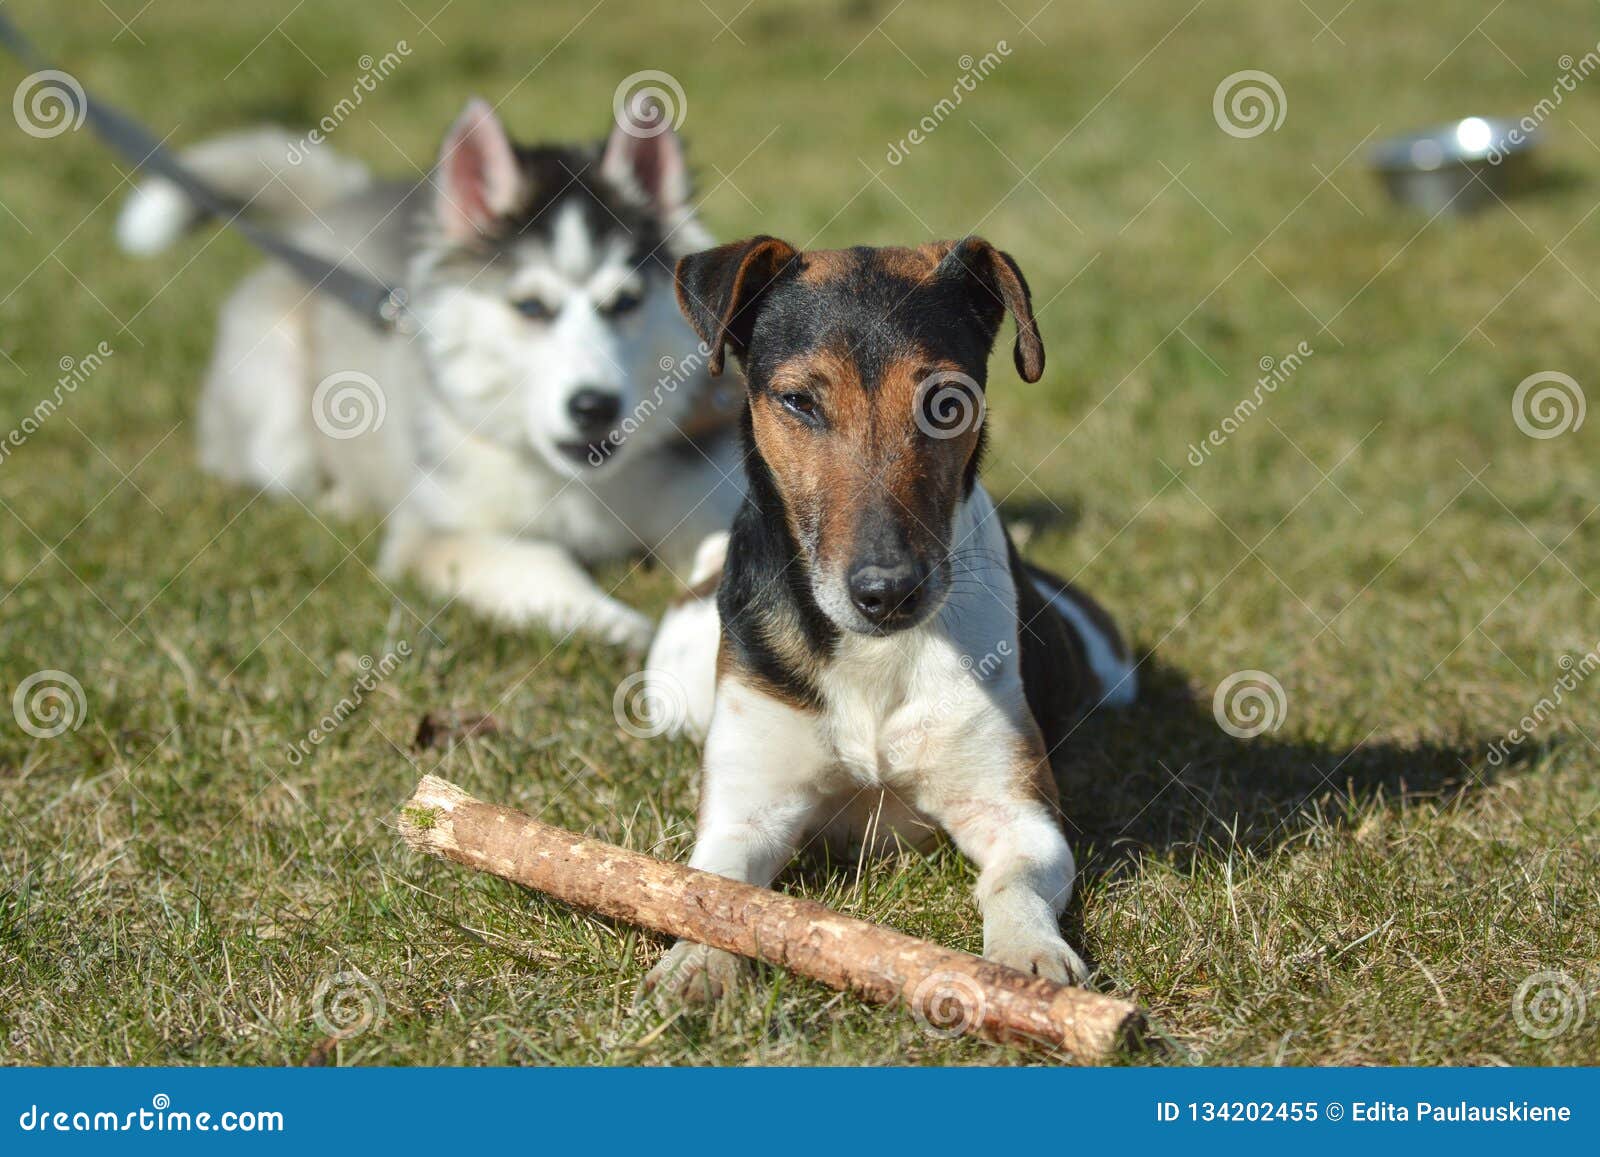 Dog S Playground Sunny And Warm Spring Day Stock Image Image Of